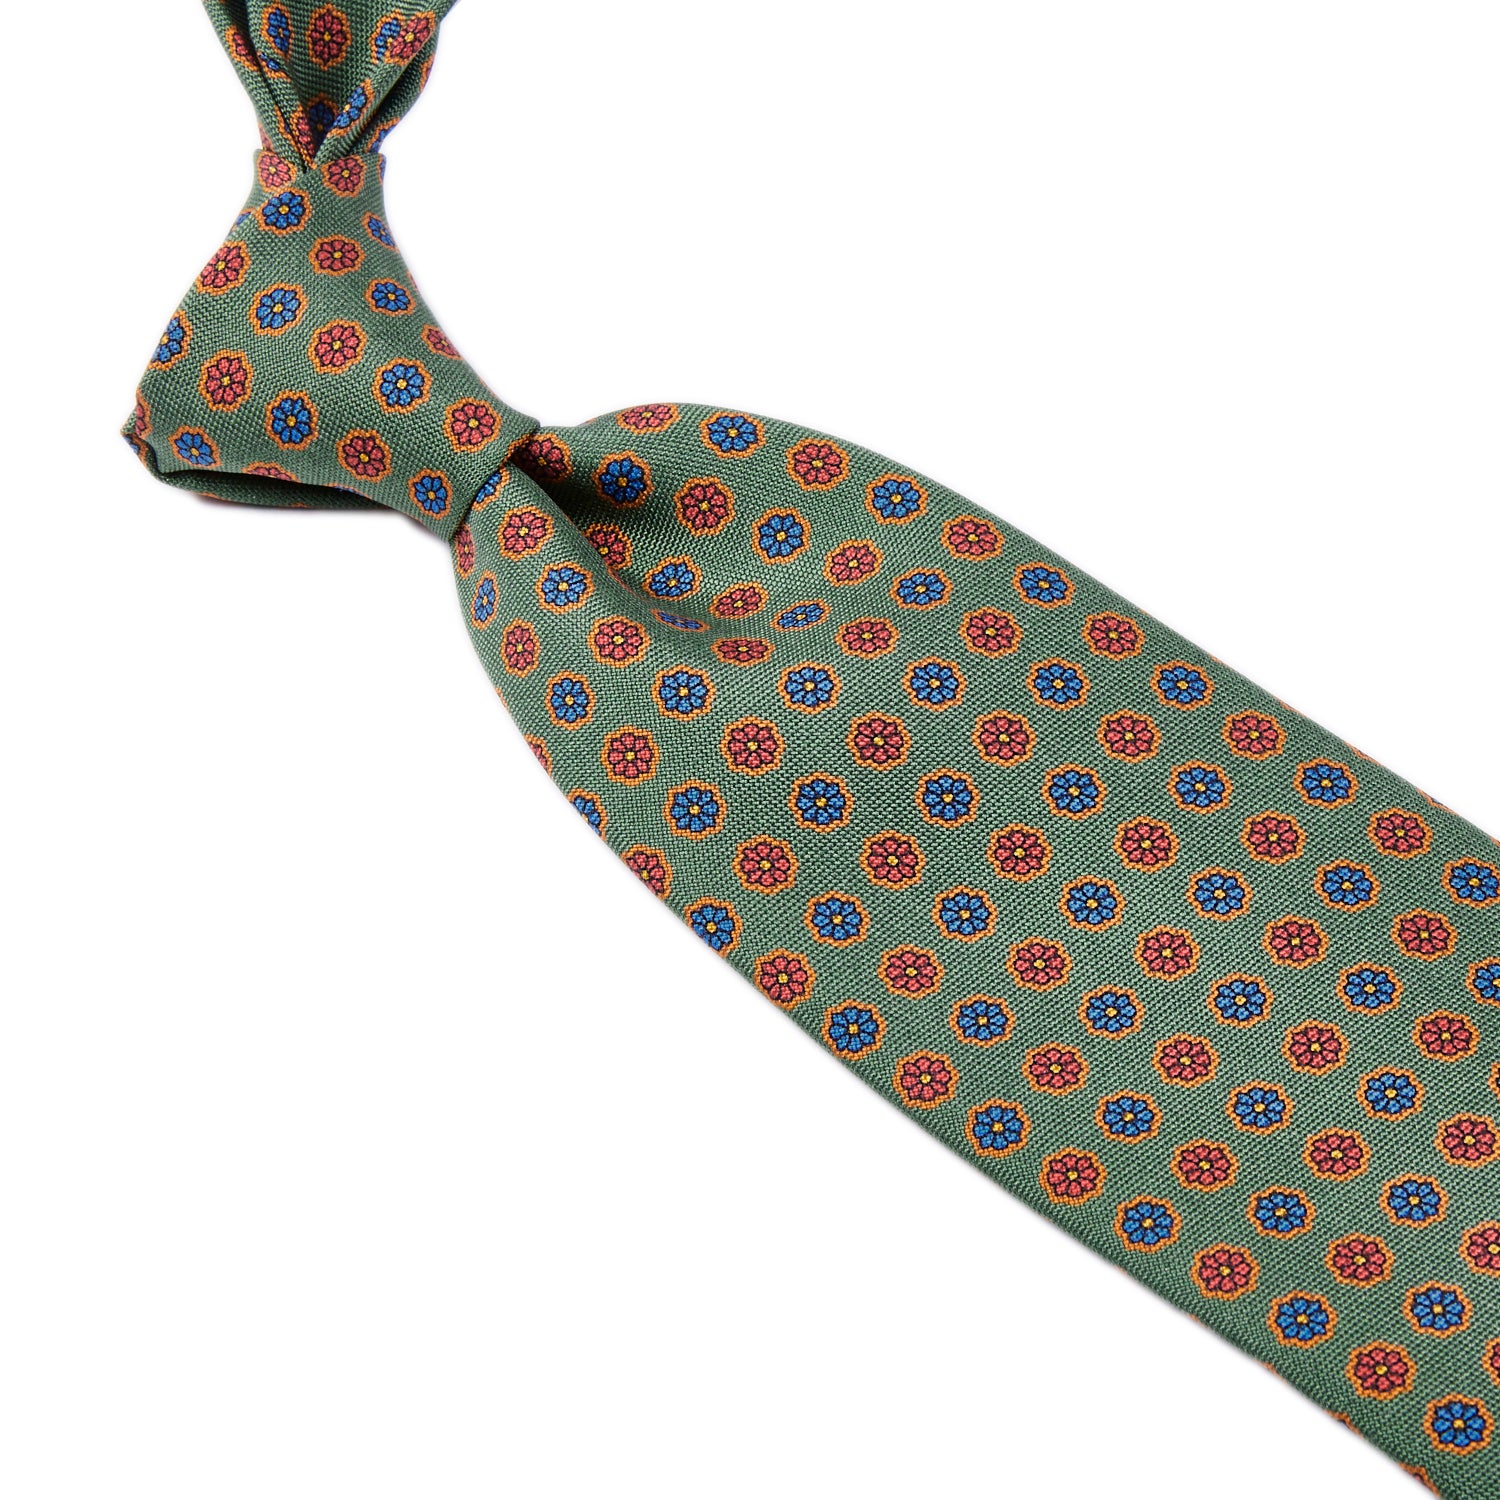 A Sovereign Grade Leaf Floral 25 oz Hopsack Silk Tie with red and blue circles on it, crafted with the highest quality craftsmanship in the United Kingdom, from KirbyAllison.com.